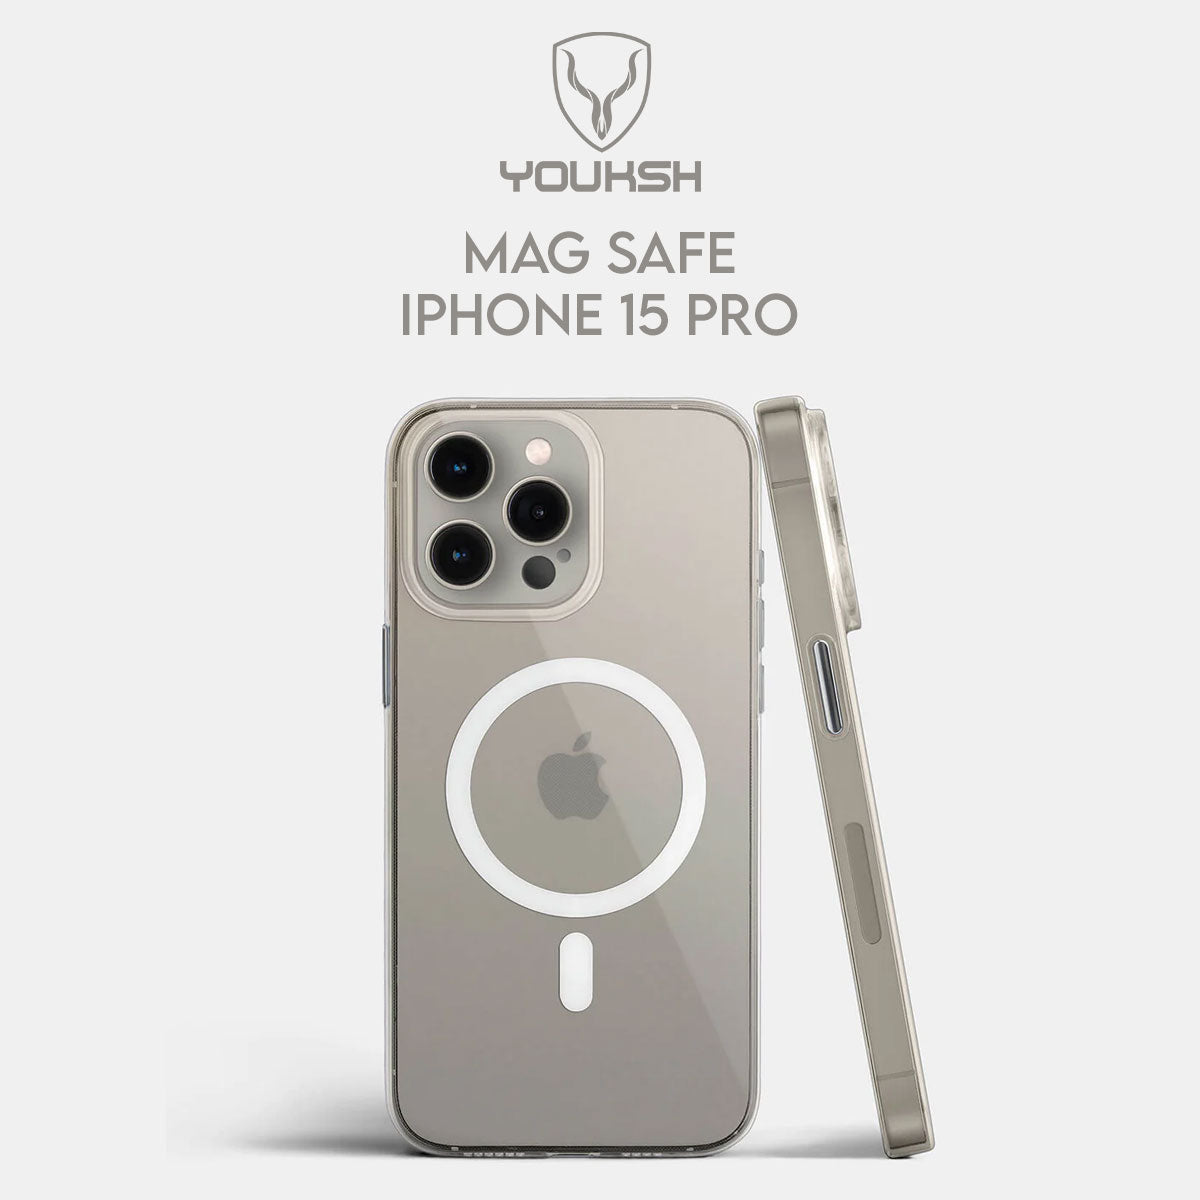 YOUKSH Mag Safe Case For IPHONE 15 Pro, Anti-Yellow Clear Case With Charging Compatible, Shock Proof With Built-In Air Bag.